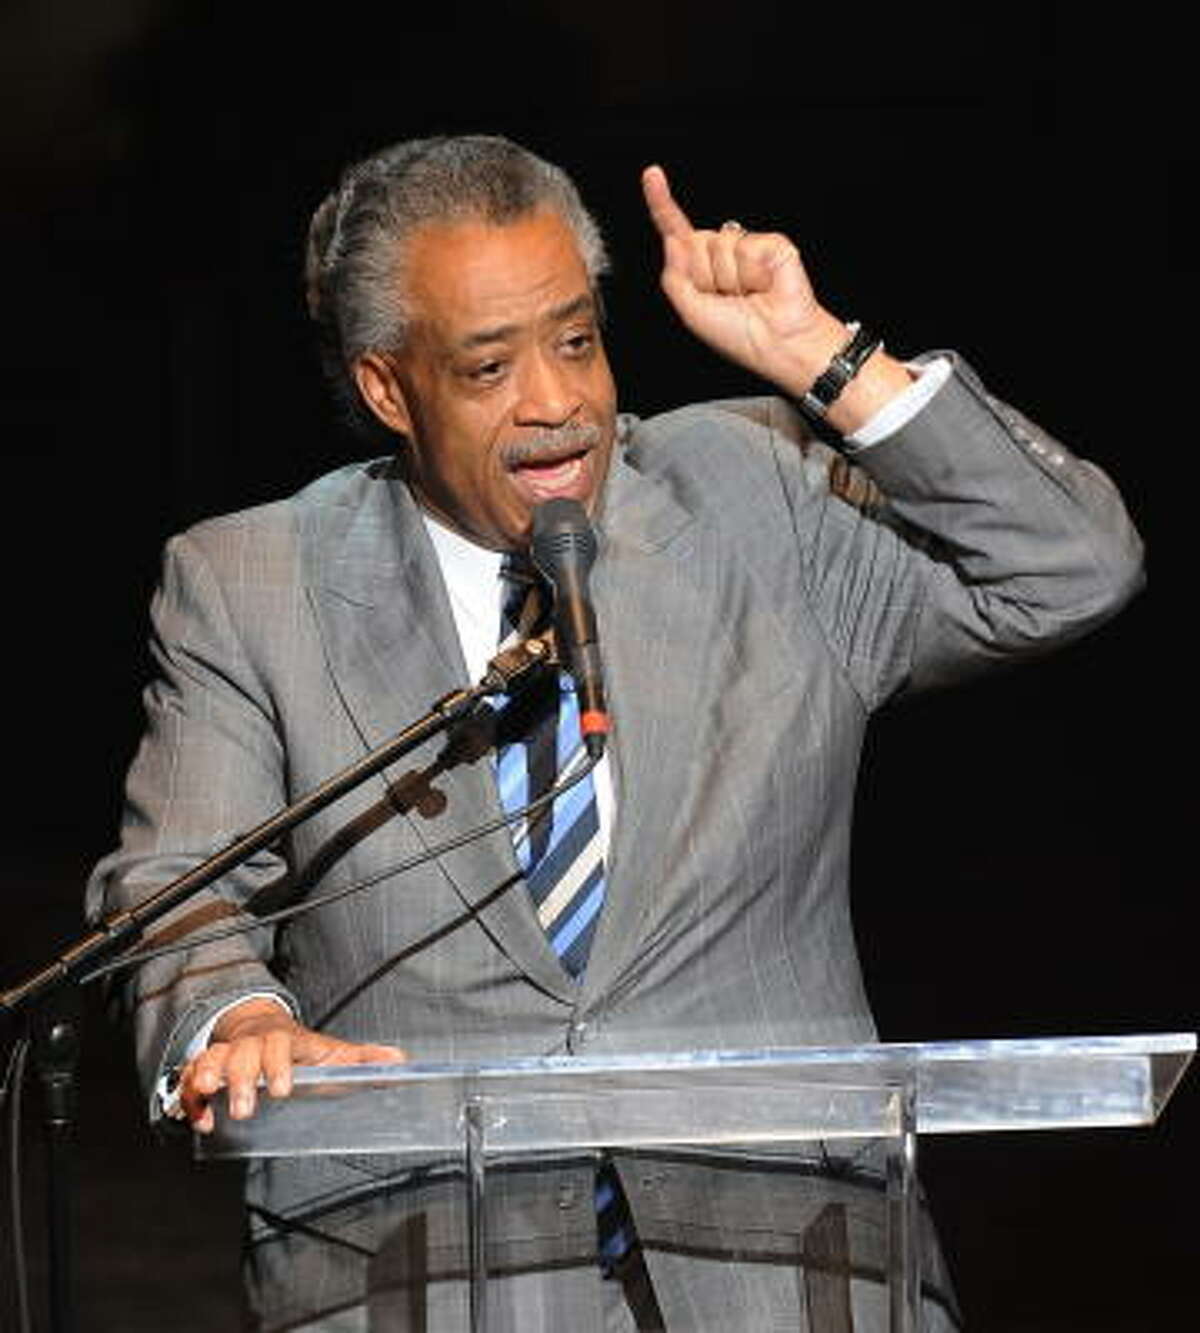 The Rev. Al Sharpton opened the memorial with a eulogy for Michael Jackson at the Apollo Theater.